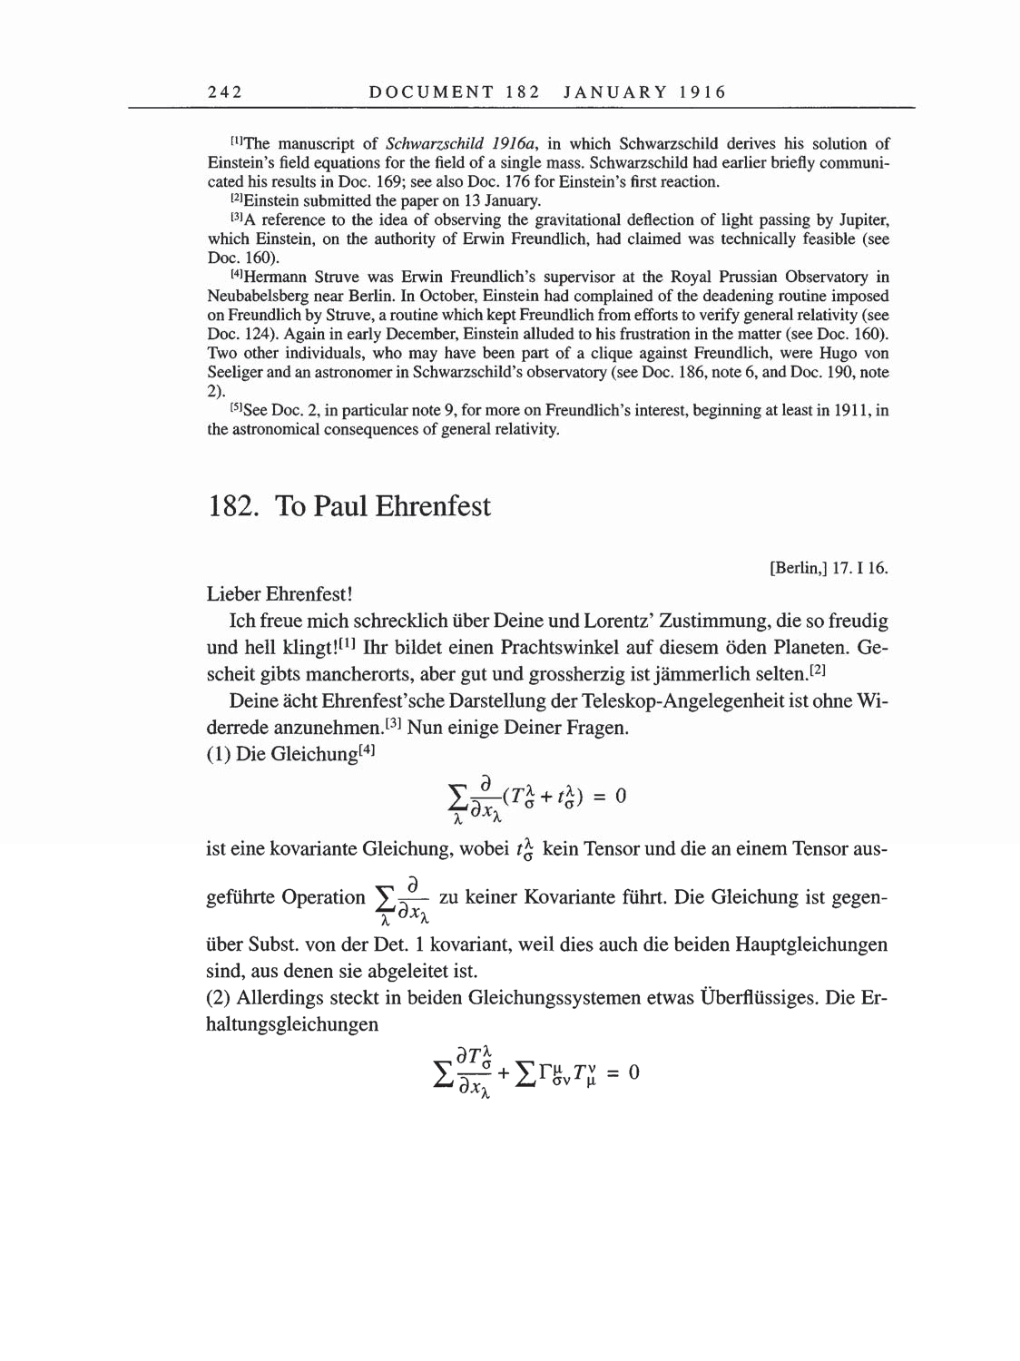 Volume 8, Part A: The Berlin Years: Correspondence 1914-1917 page 242